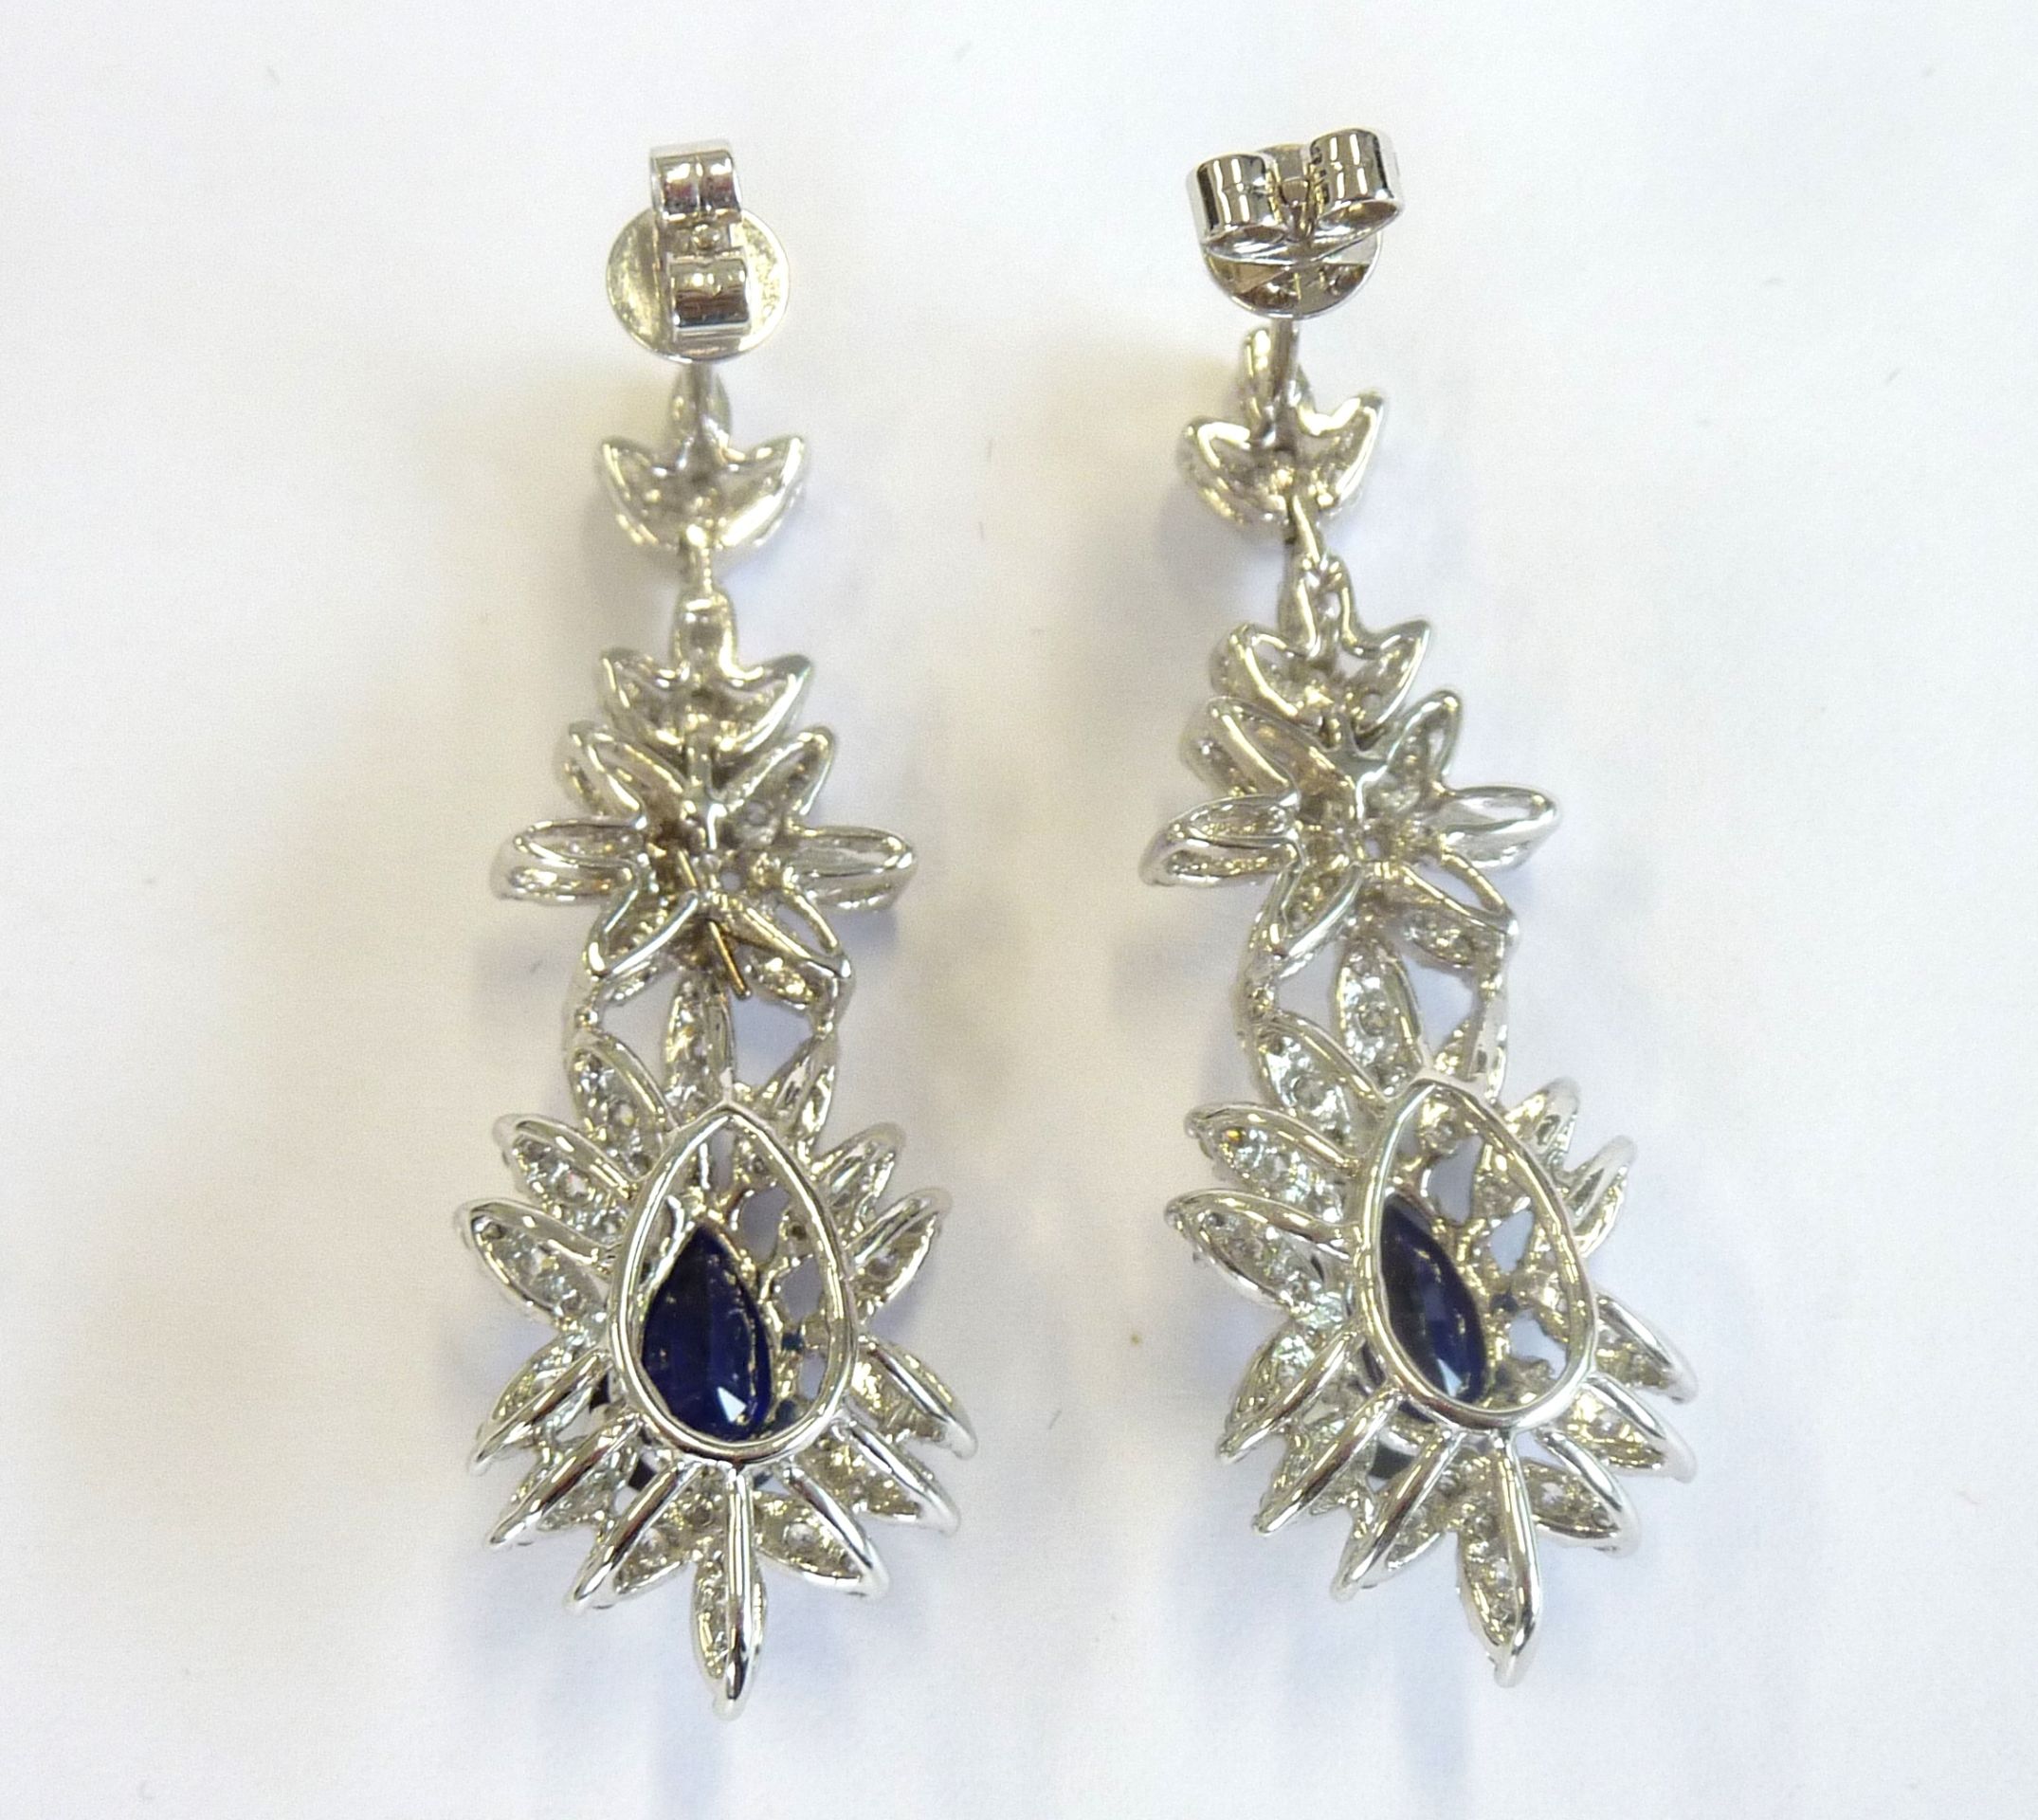 A pair of sapphire and diamond earrings (matching lot 334)